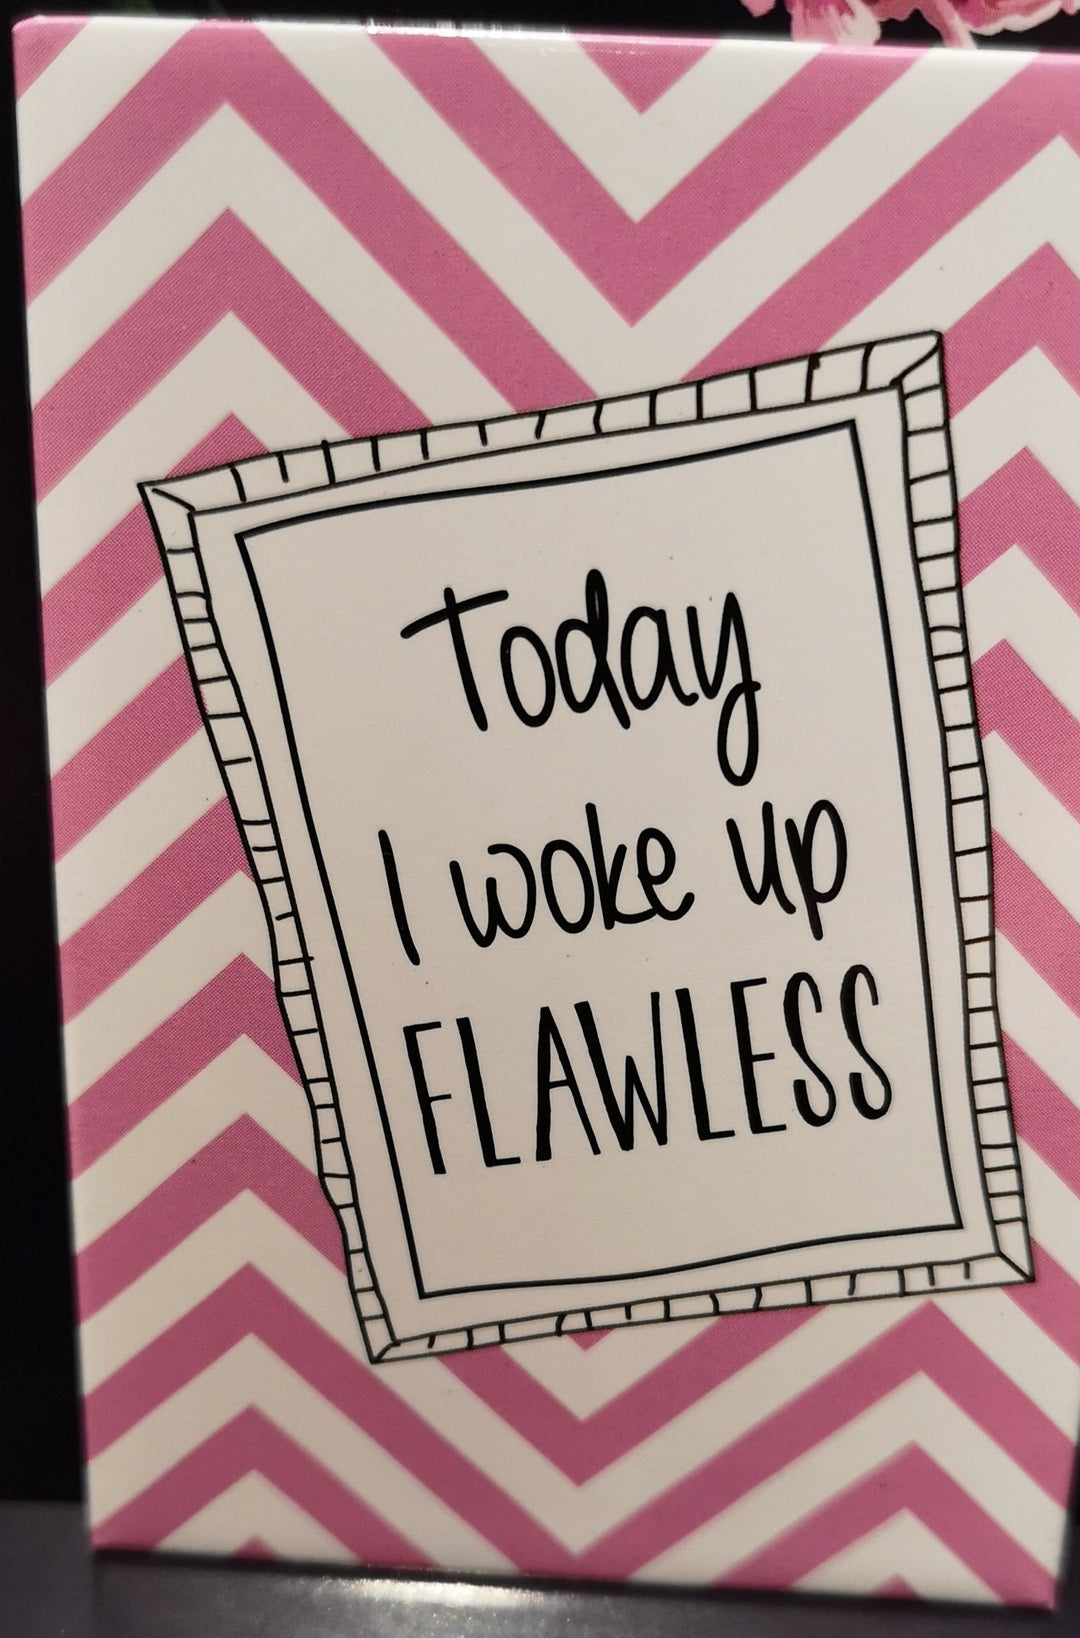 Magnet, "Today I woke up flawless" , ca. 6cm  x 6 cm - British Moments